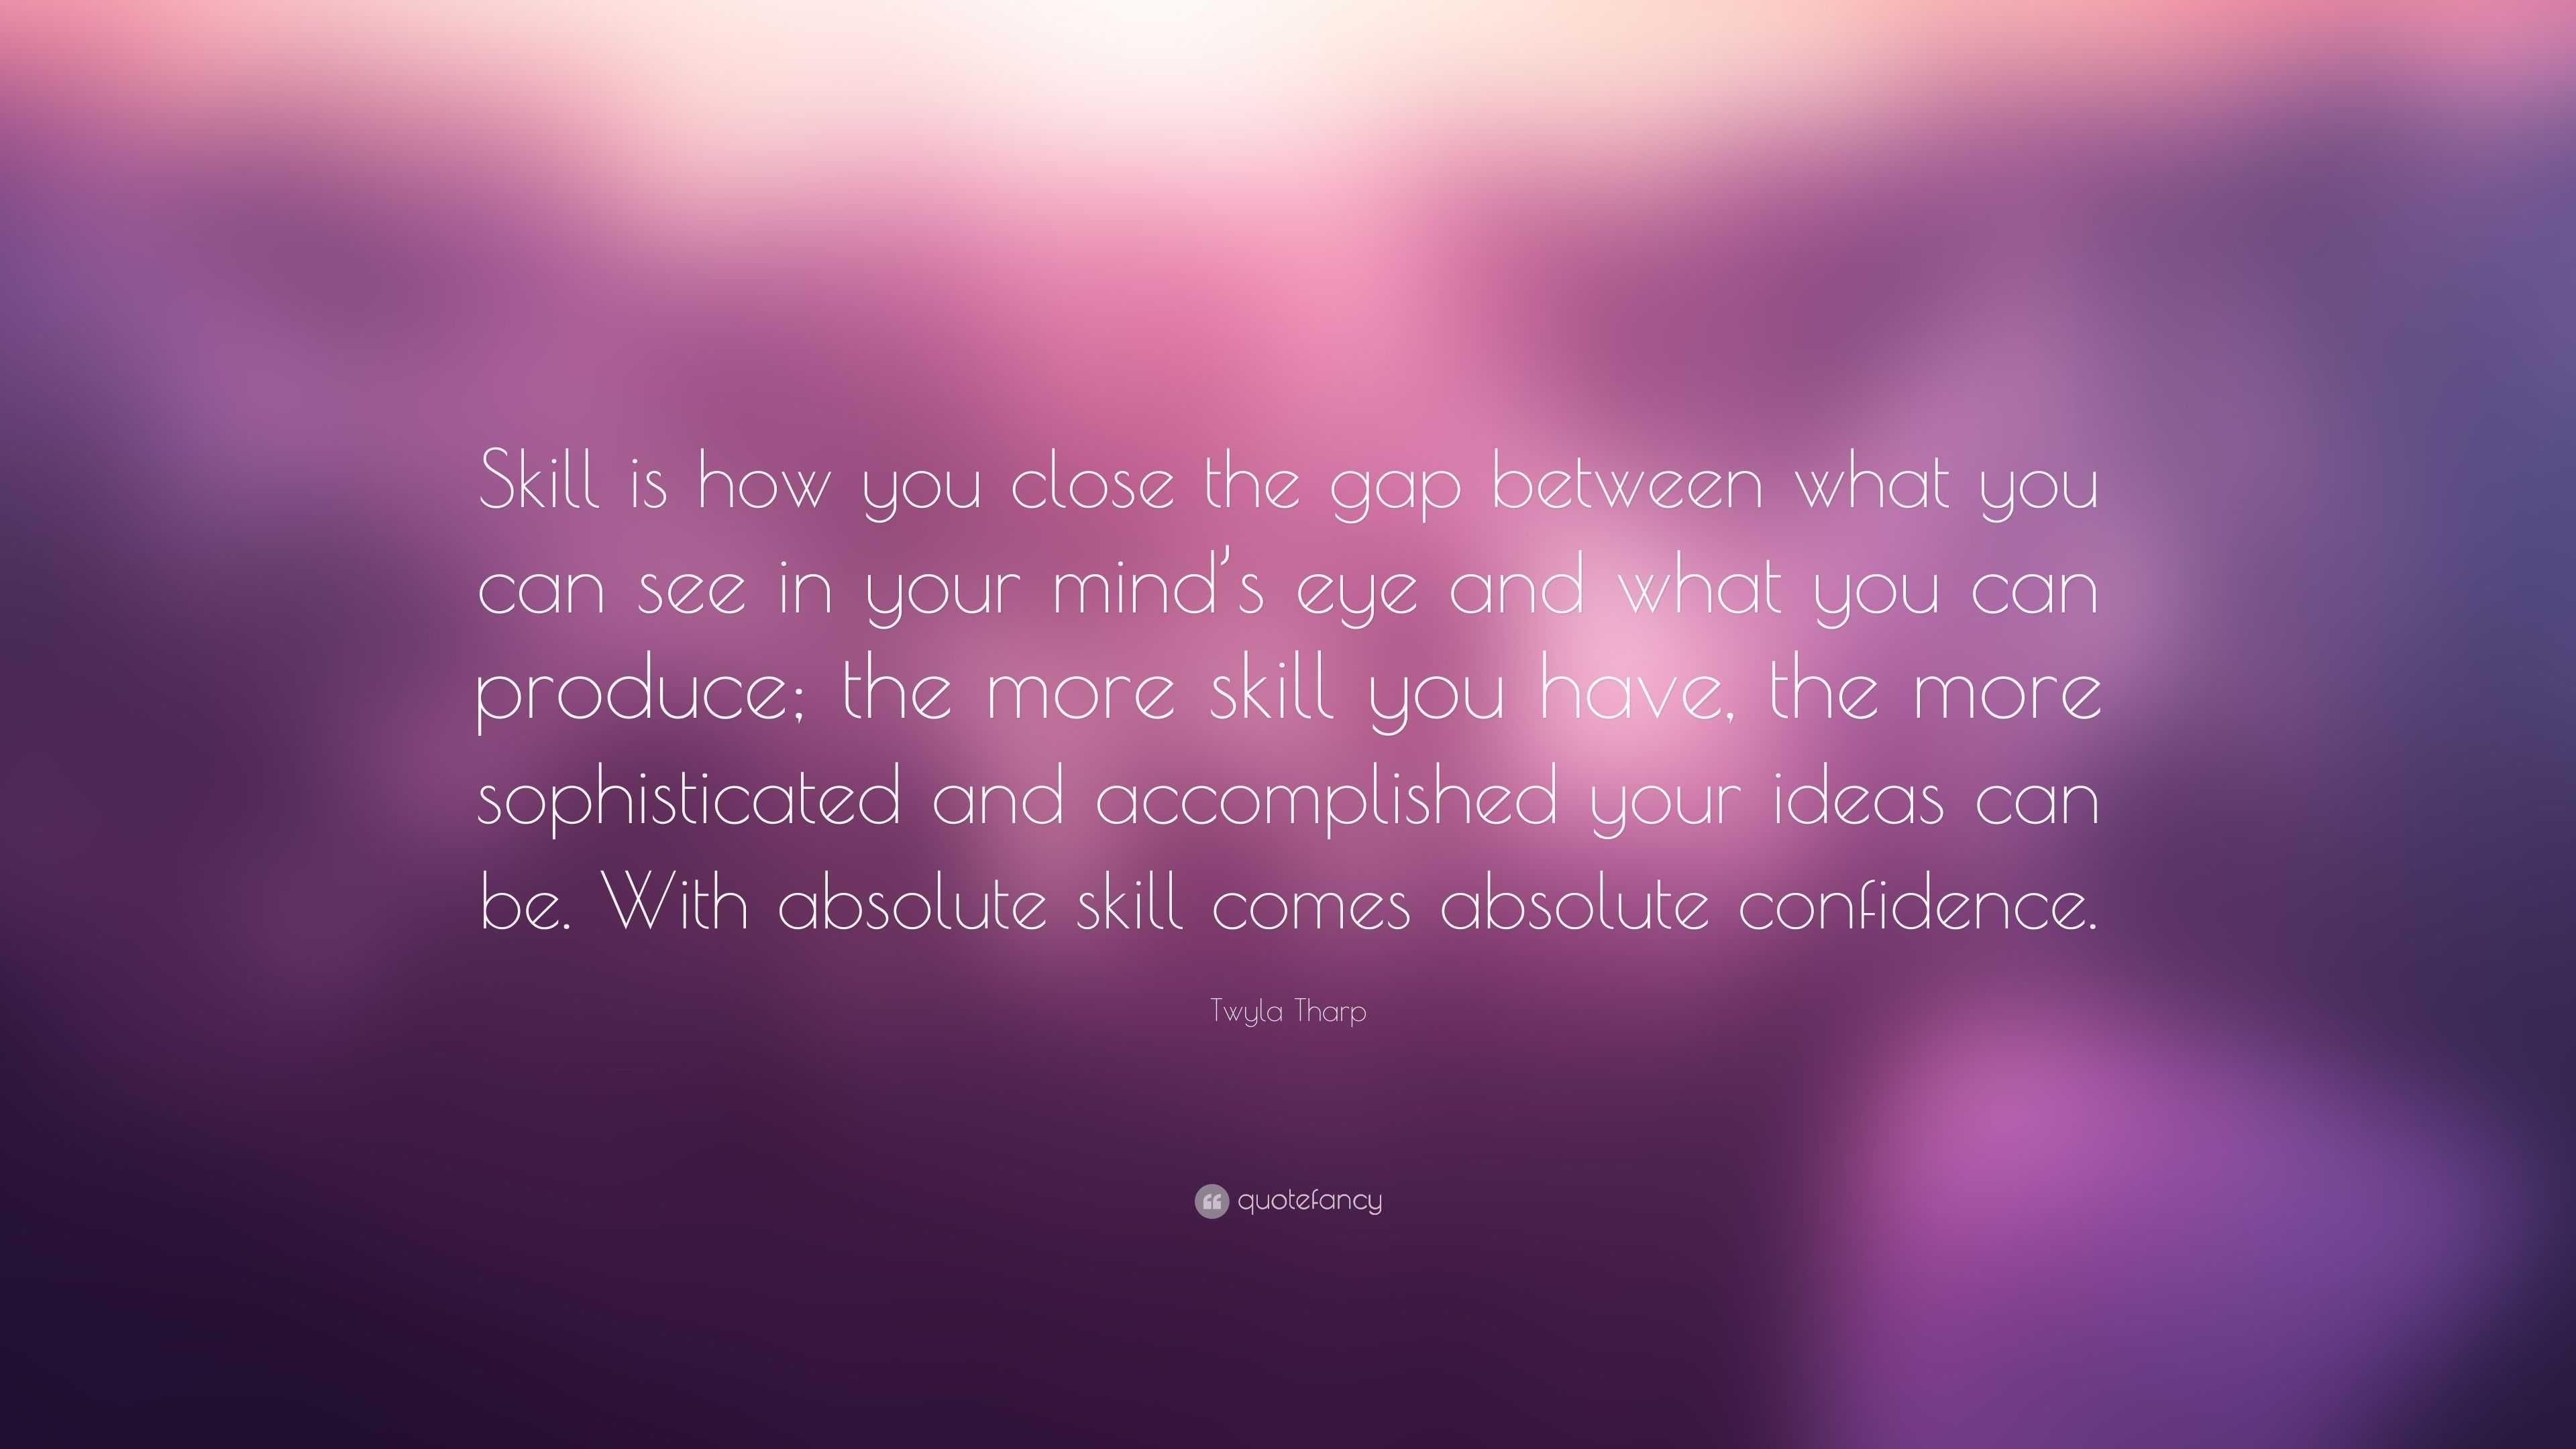 Twyla Tharp Quote: “Skill is how you close the gap between what you can ...